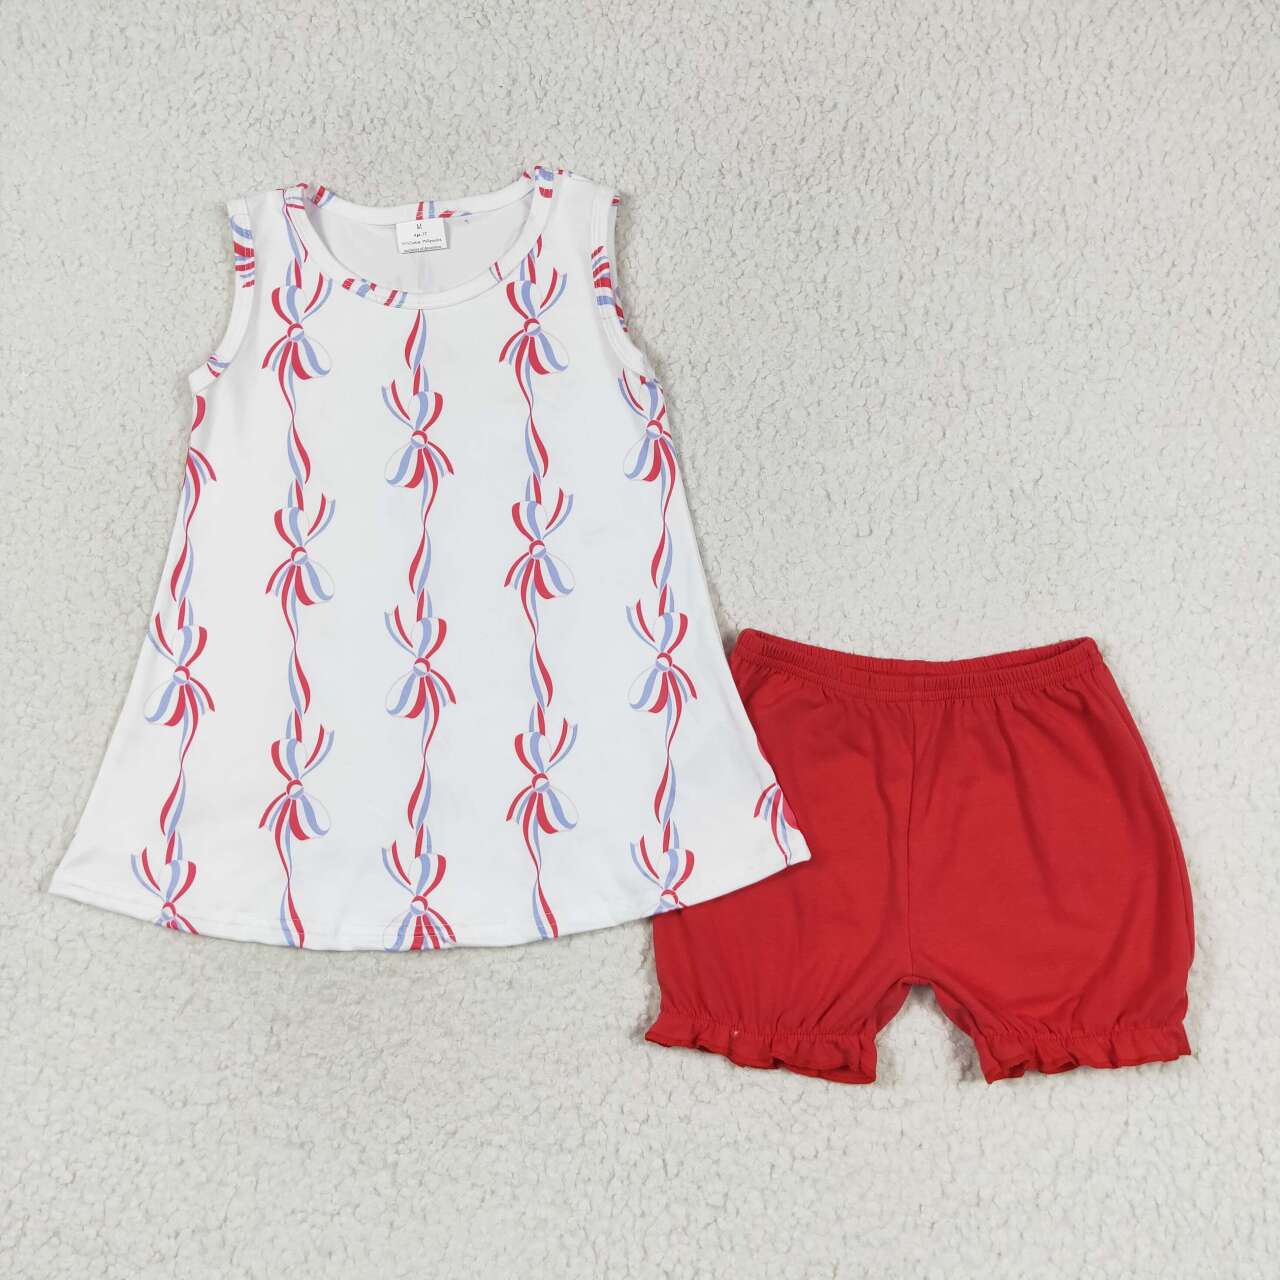 Bows Print Sisters 4th of July Matching Clothes